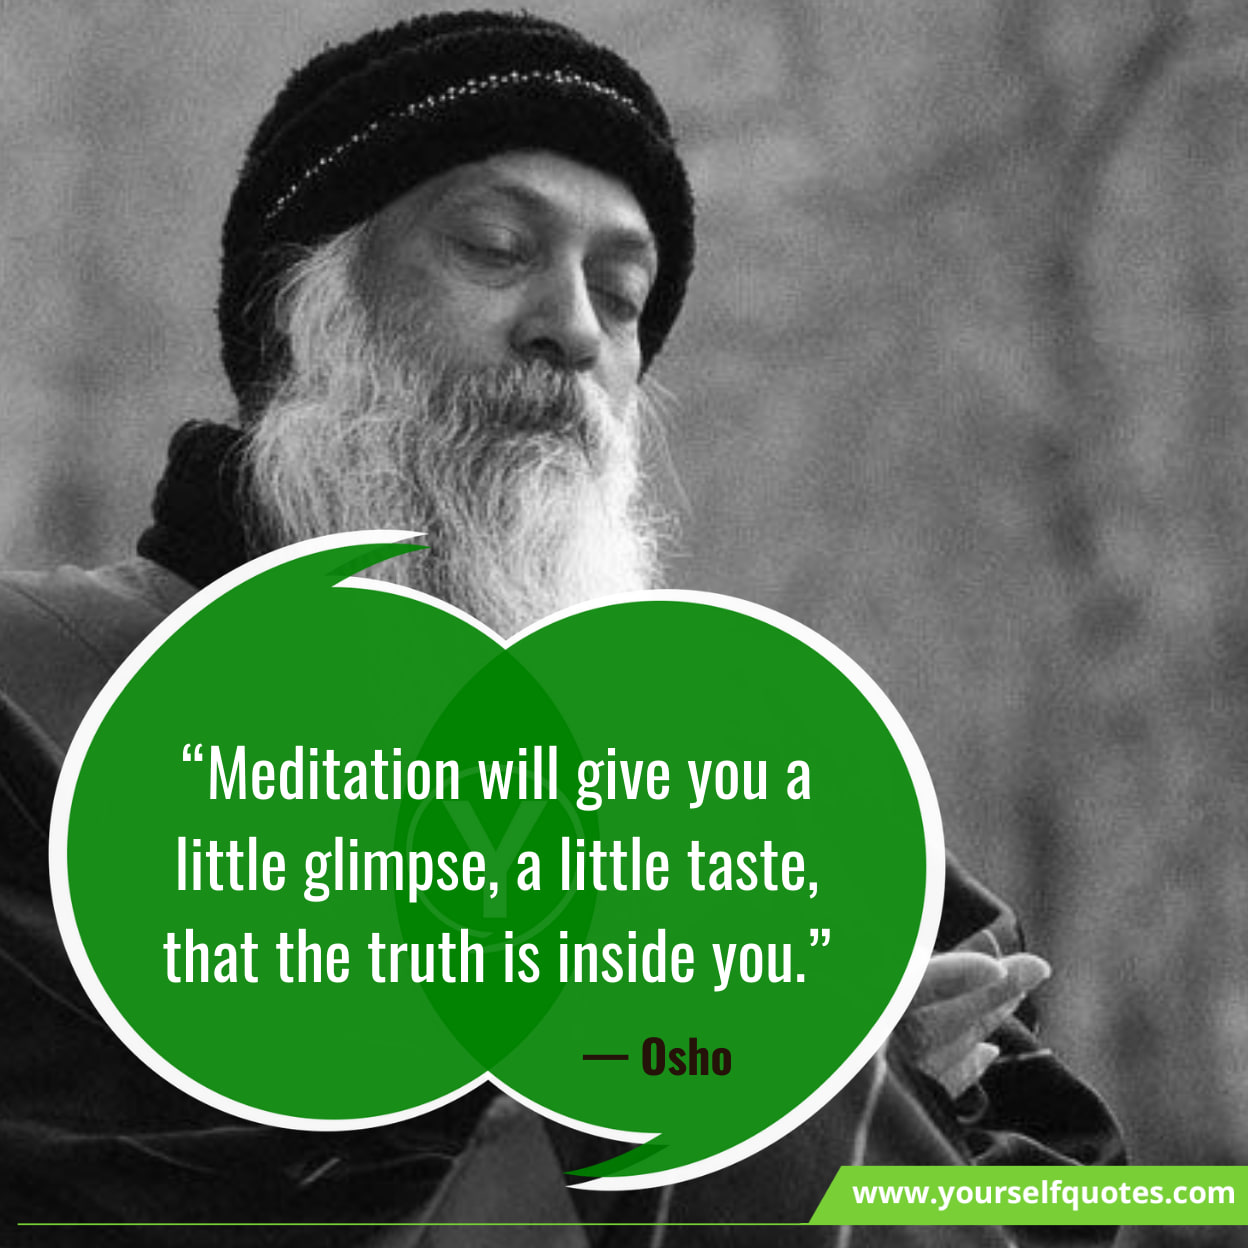 110 Meditation Quotes That Will Grant You Peace Of Mind